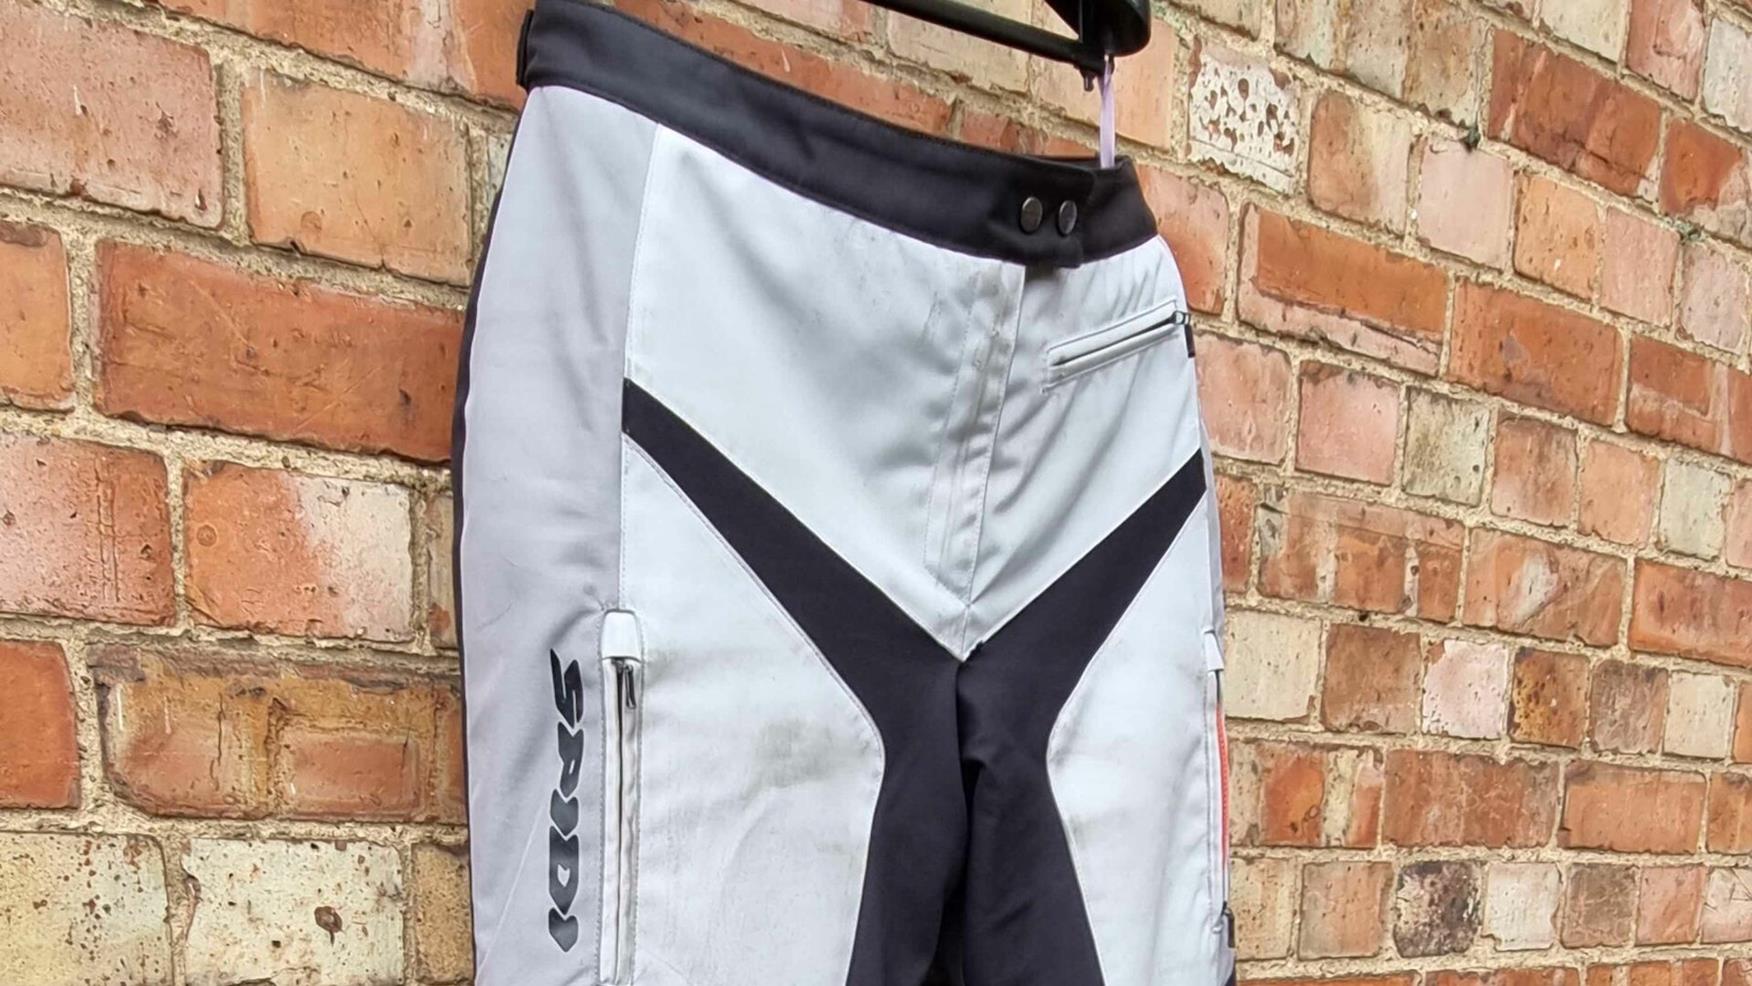 Riding trousers review: Spidi Traveler 2 H2Out tried and tested